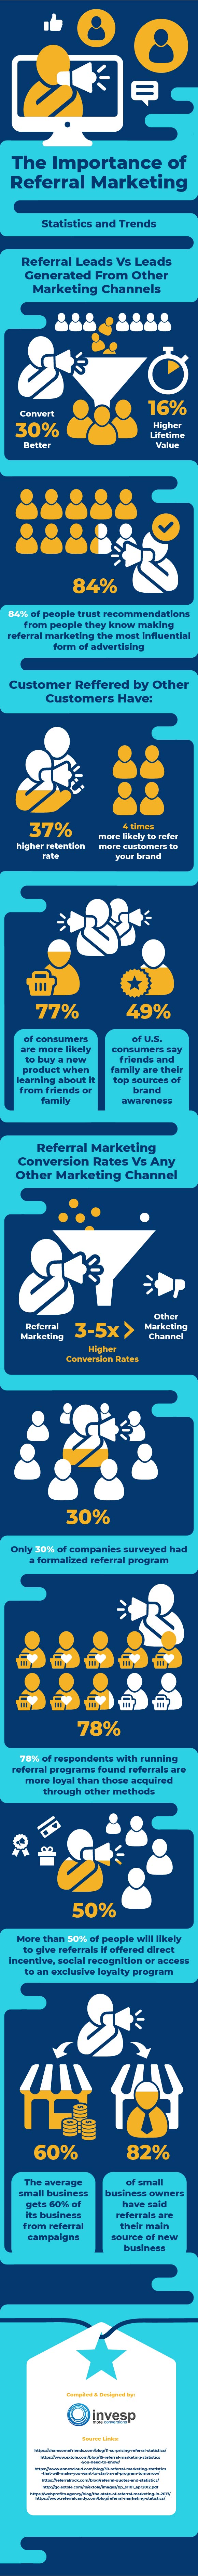 The importance of referral marketing – Statistics and Trends